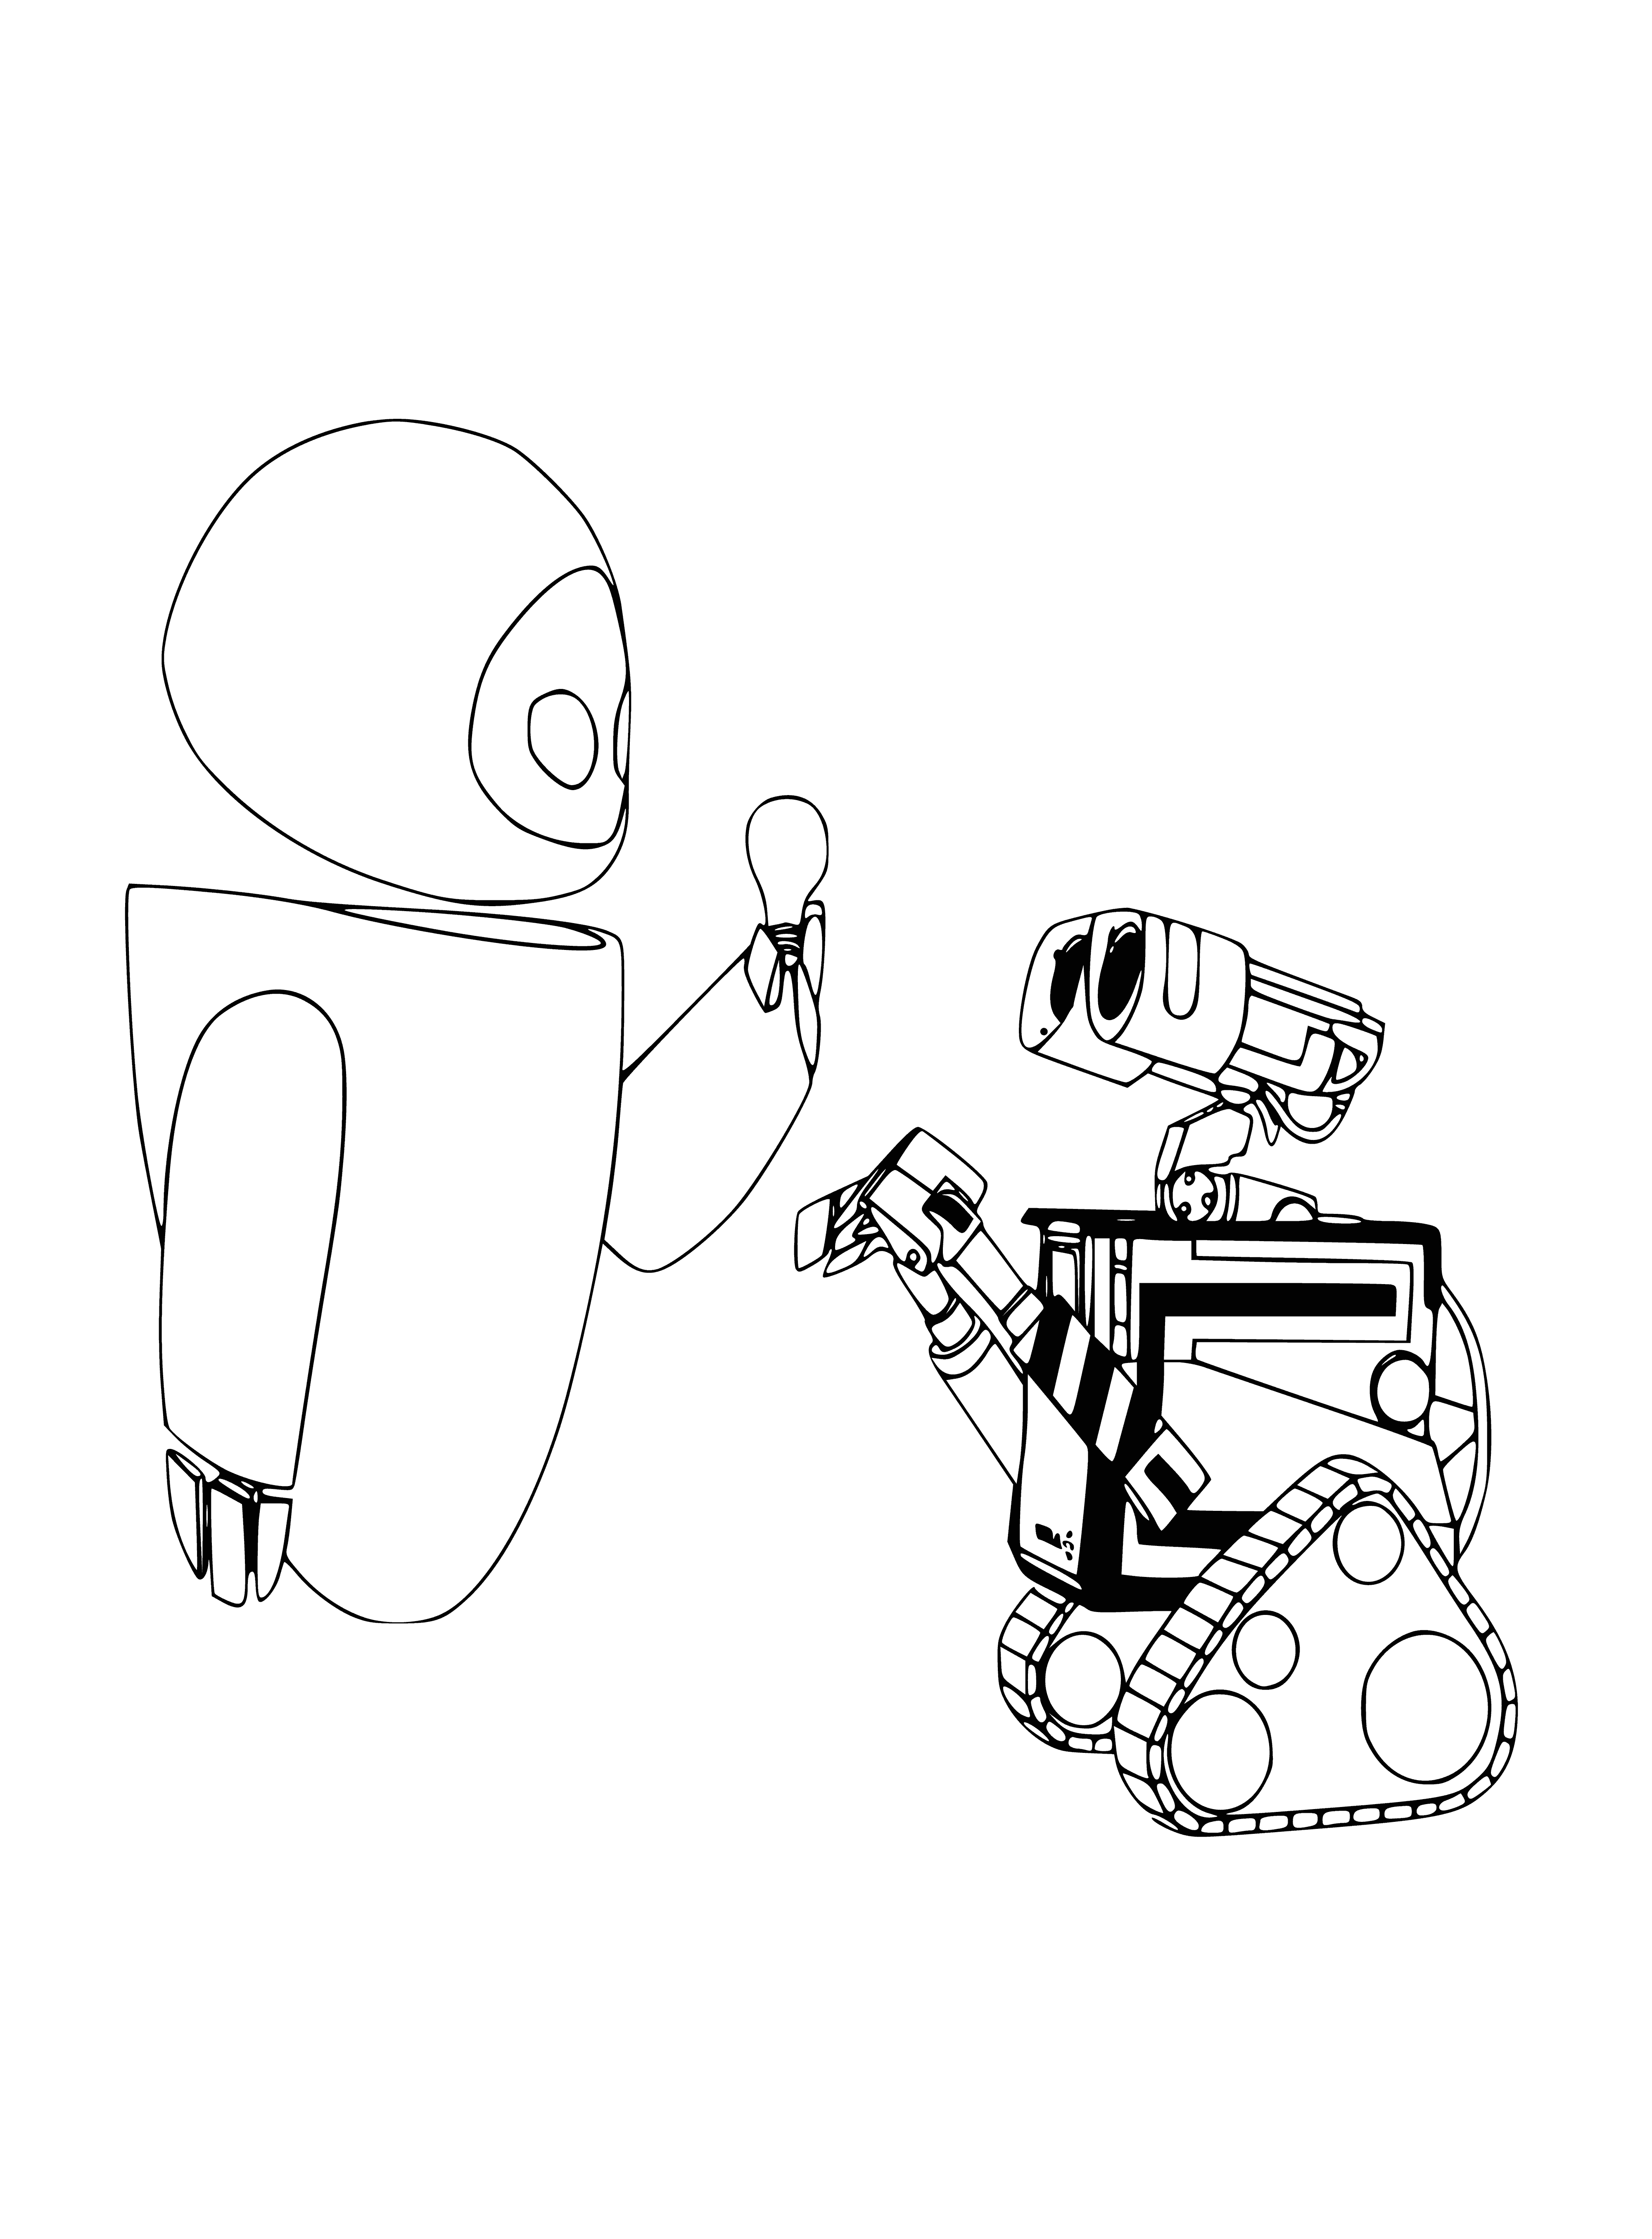 coloring page: Two robots with big eyes meet, blue-eyed one looks up happily at white-eyed one. They have square heads and outstretched arms.